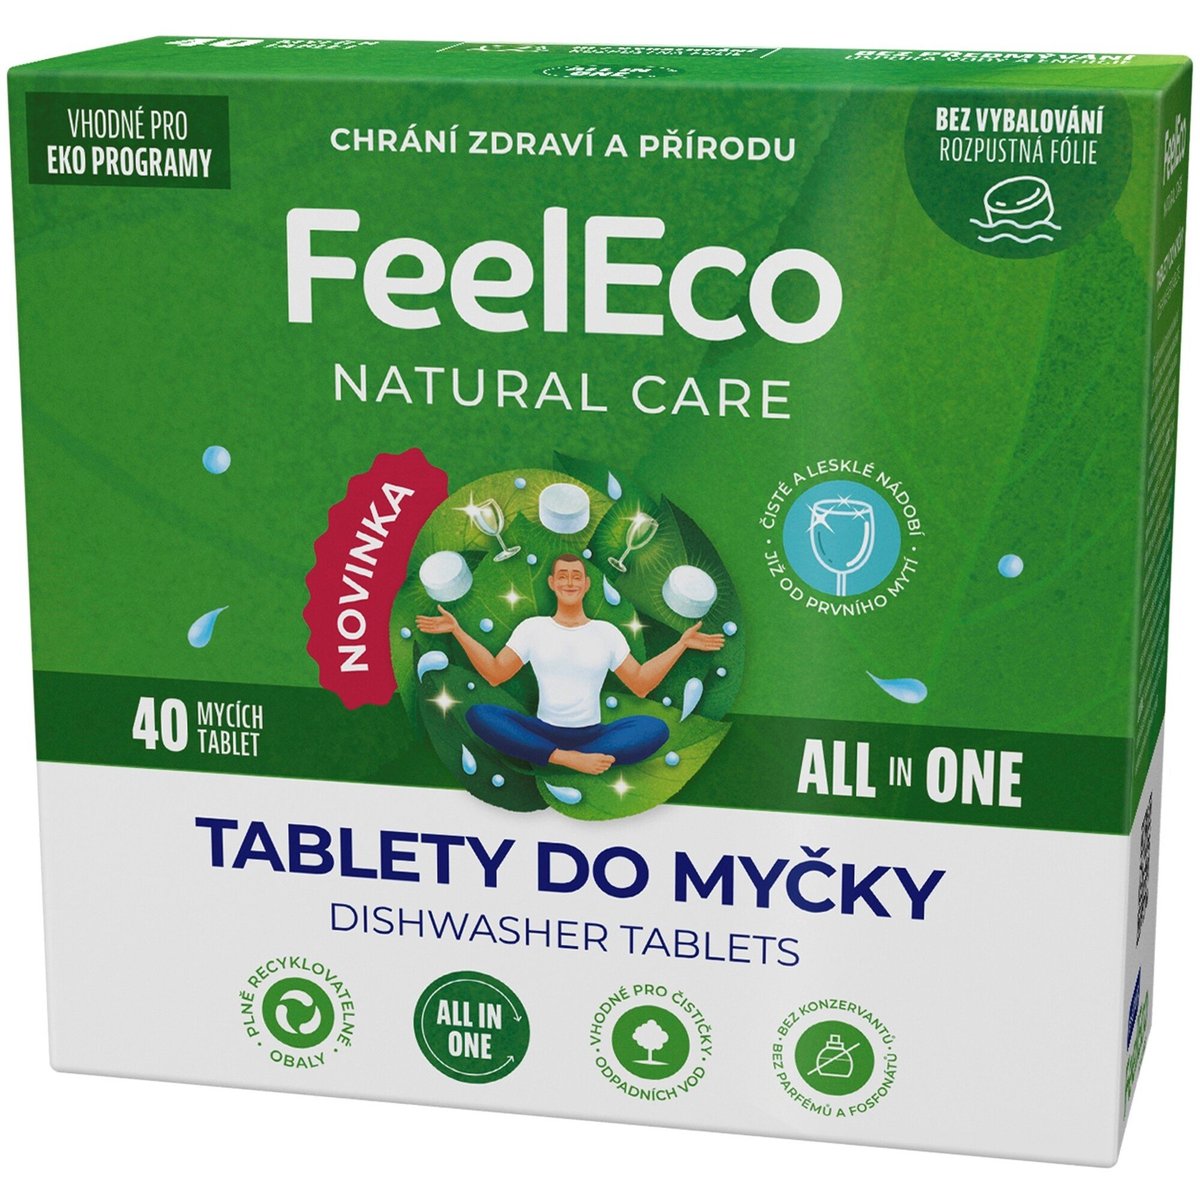 Feel Eco All in One tablety do myčky